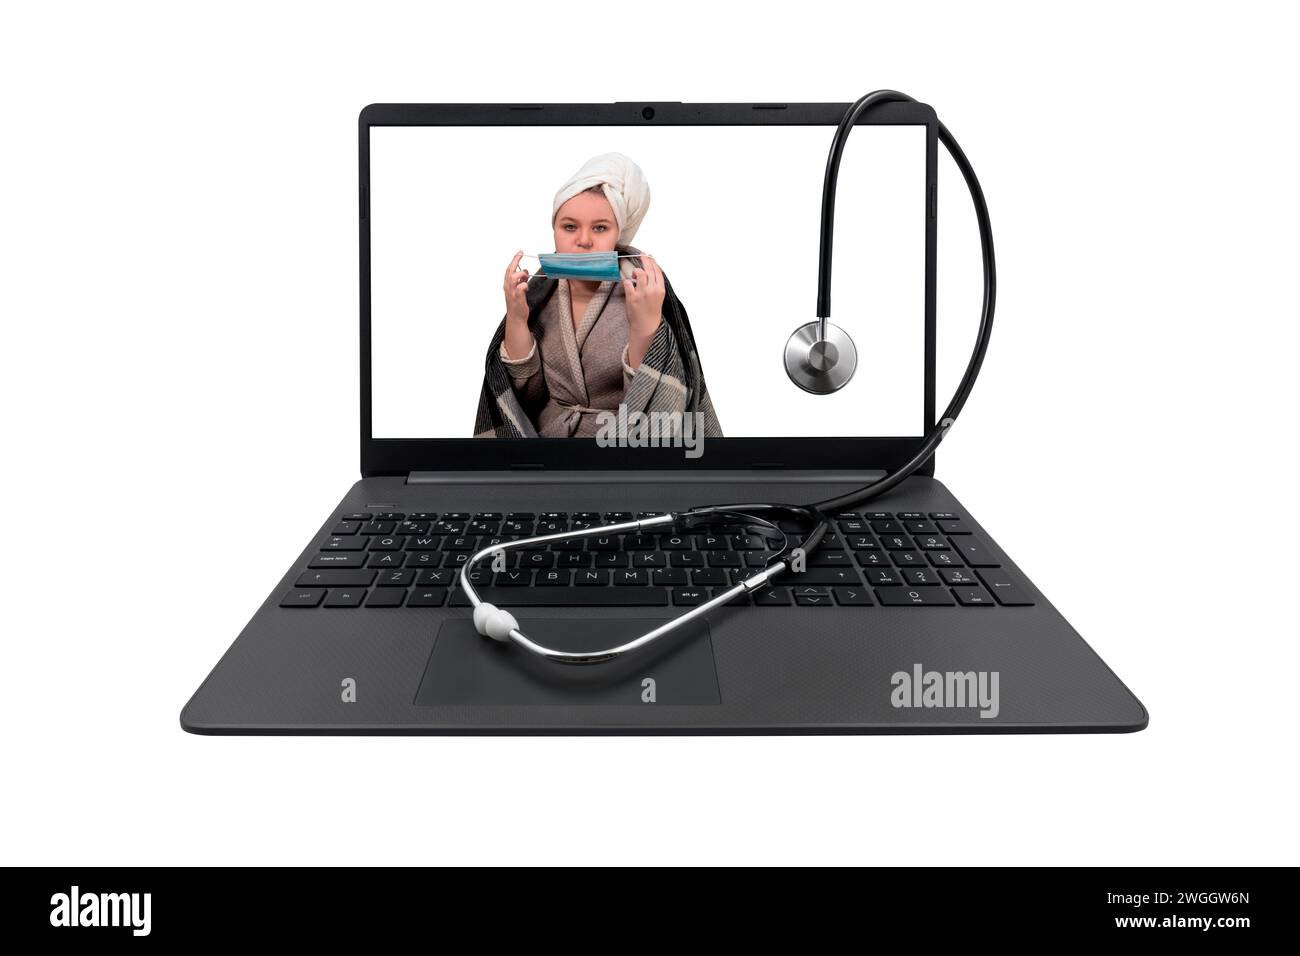 Laptop and medical stethoscope isolated on white background. On laptop screen - a girl with cold symptoms puts a protective medical mask on her face Stock Photo